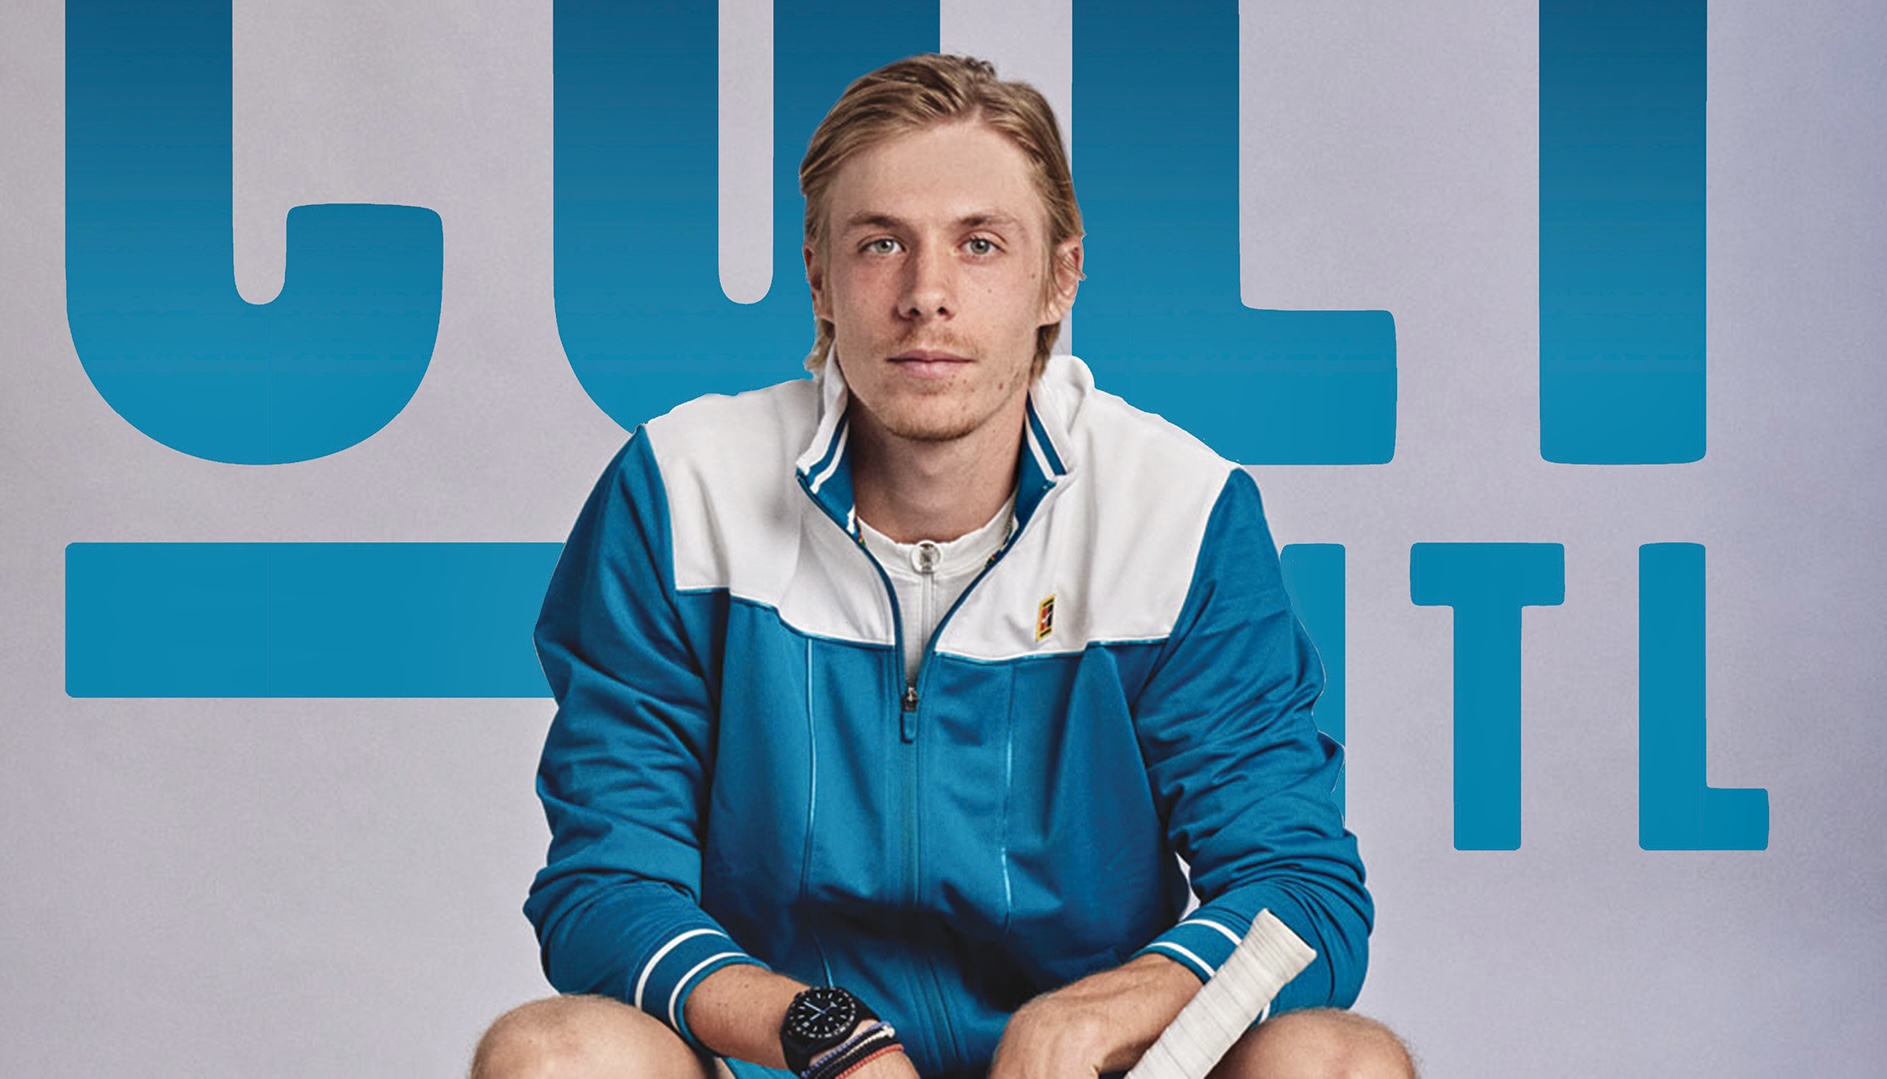 Our August issue features Denis Shapovalov, who plays the National Bank Open this month